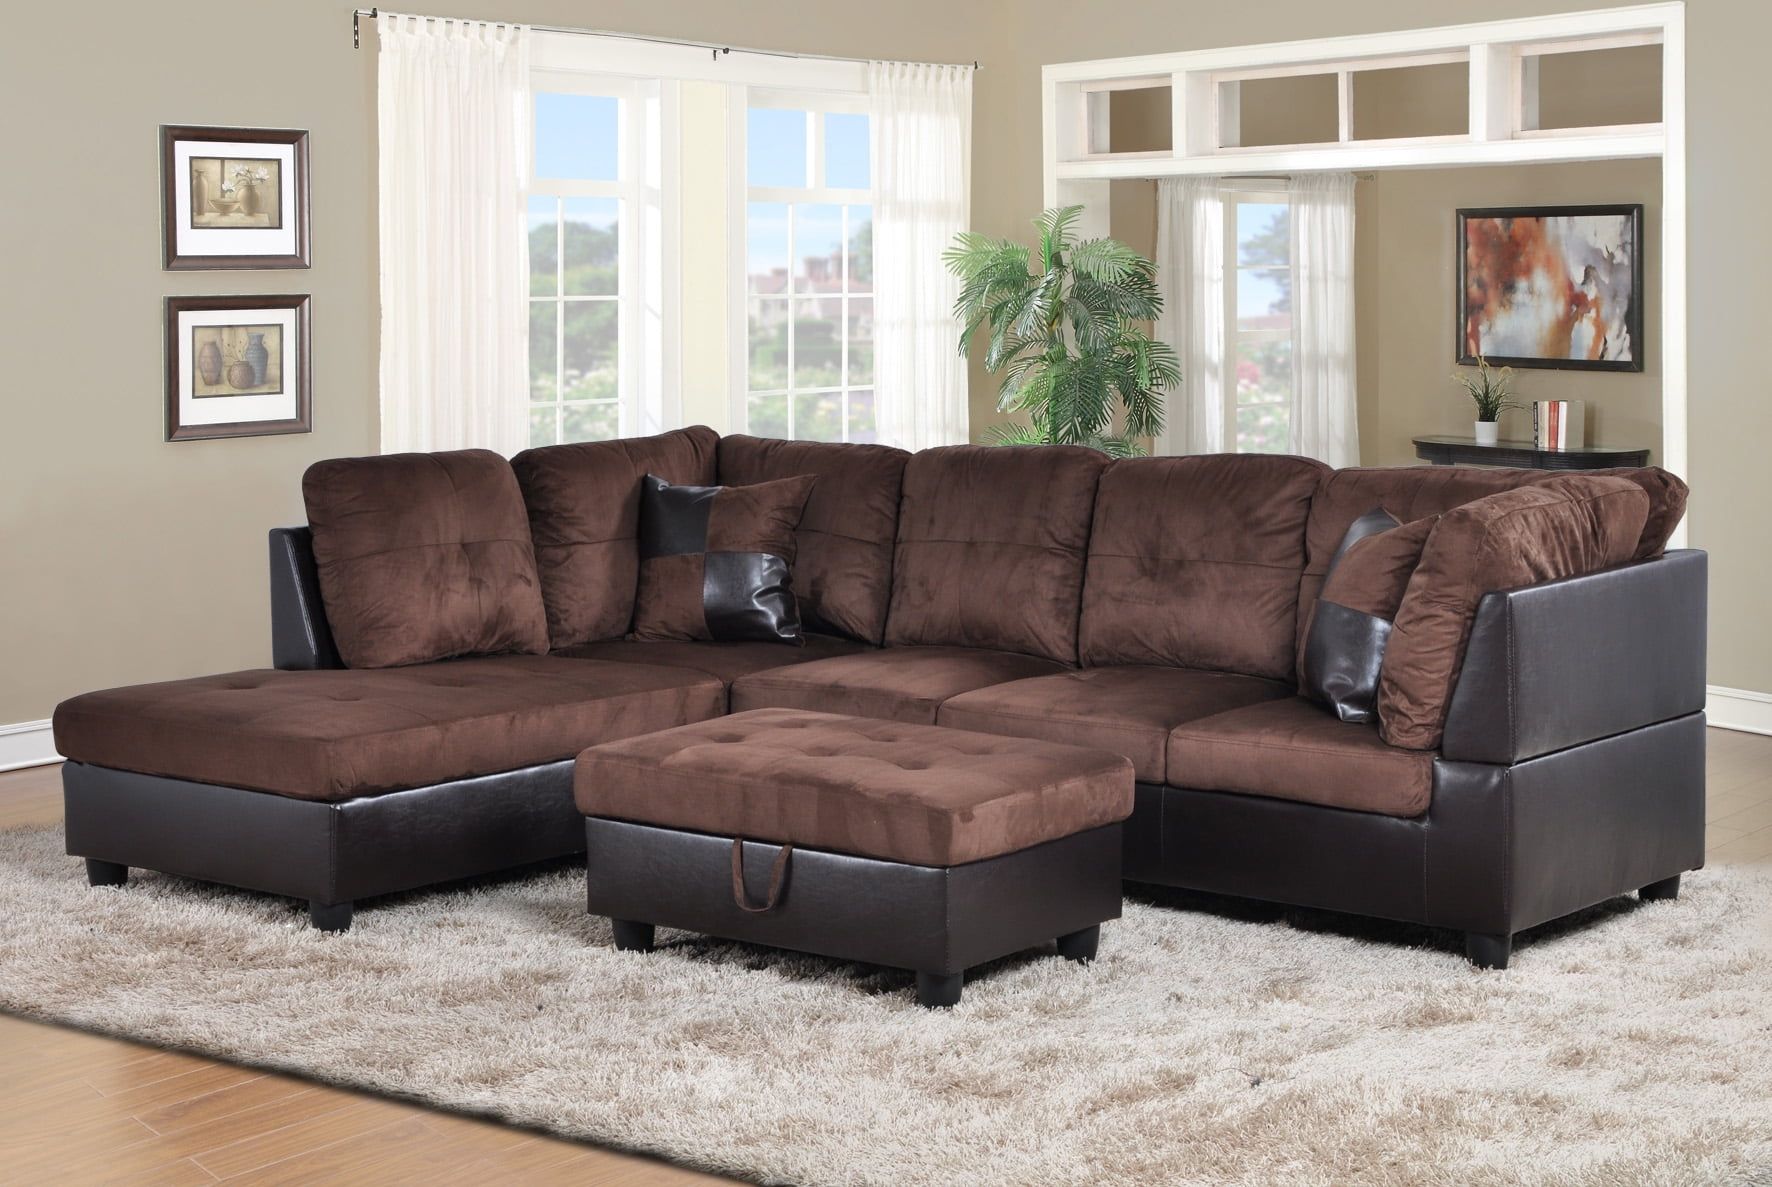 Ponliving Furniture Hermann Left Chaise Sectional Sofa With Storage Throughout Faux Leather Sofas In Chocolate Brown (Gallery 16 of 20)